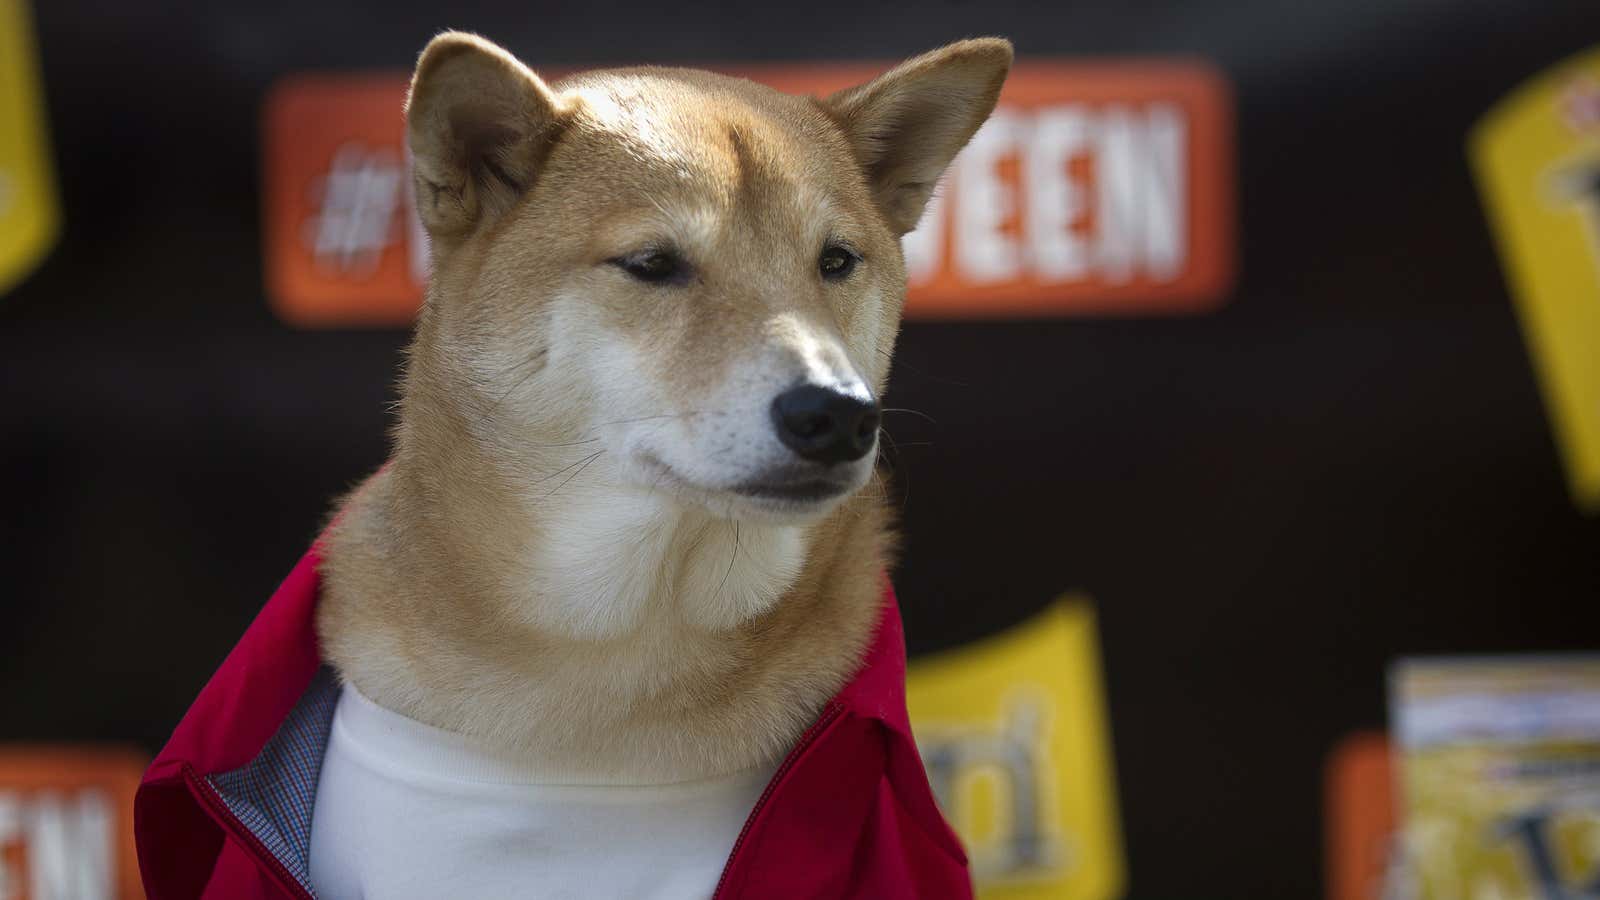 The Shiba Inu is the mascot of competing meme coins Dogecoin and Shiba Inu coin.